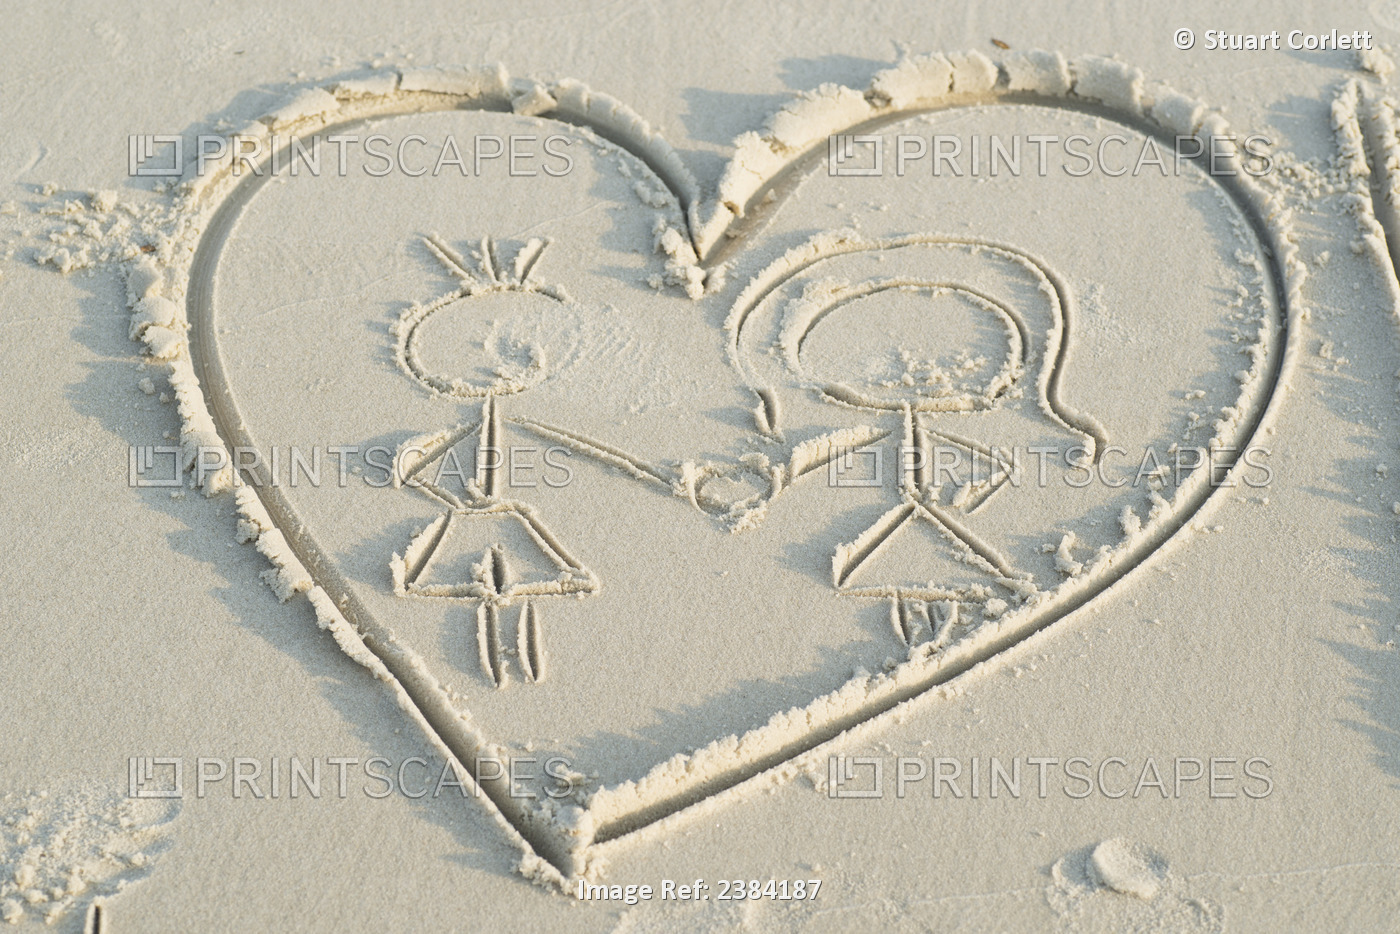 Heart Symbolizing Love And Couples Drawn In The Sand; Koh Samet Island, Thailand